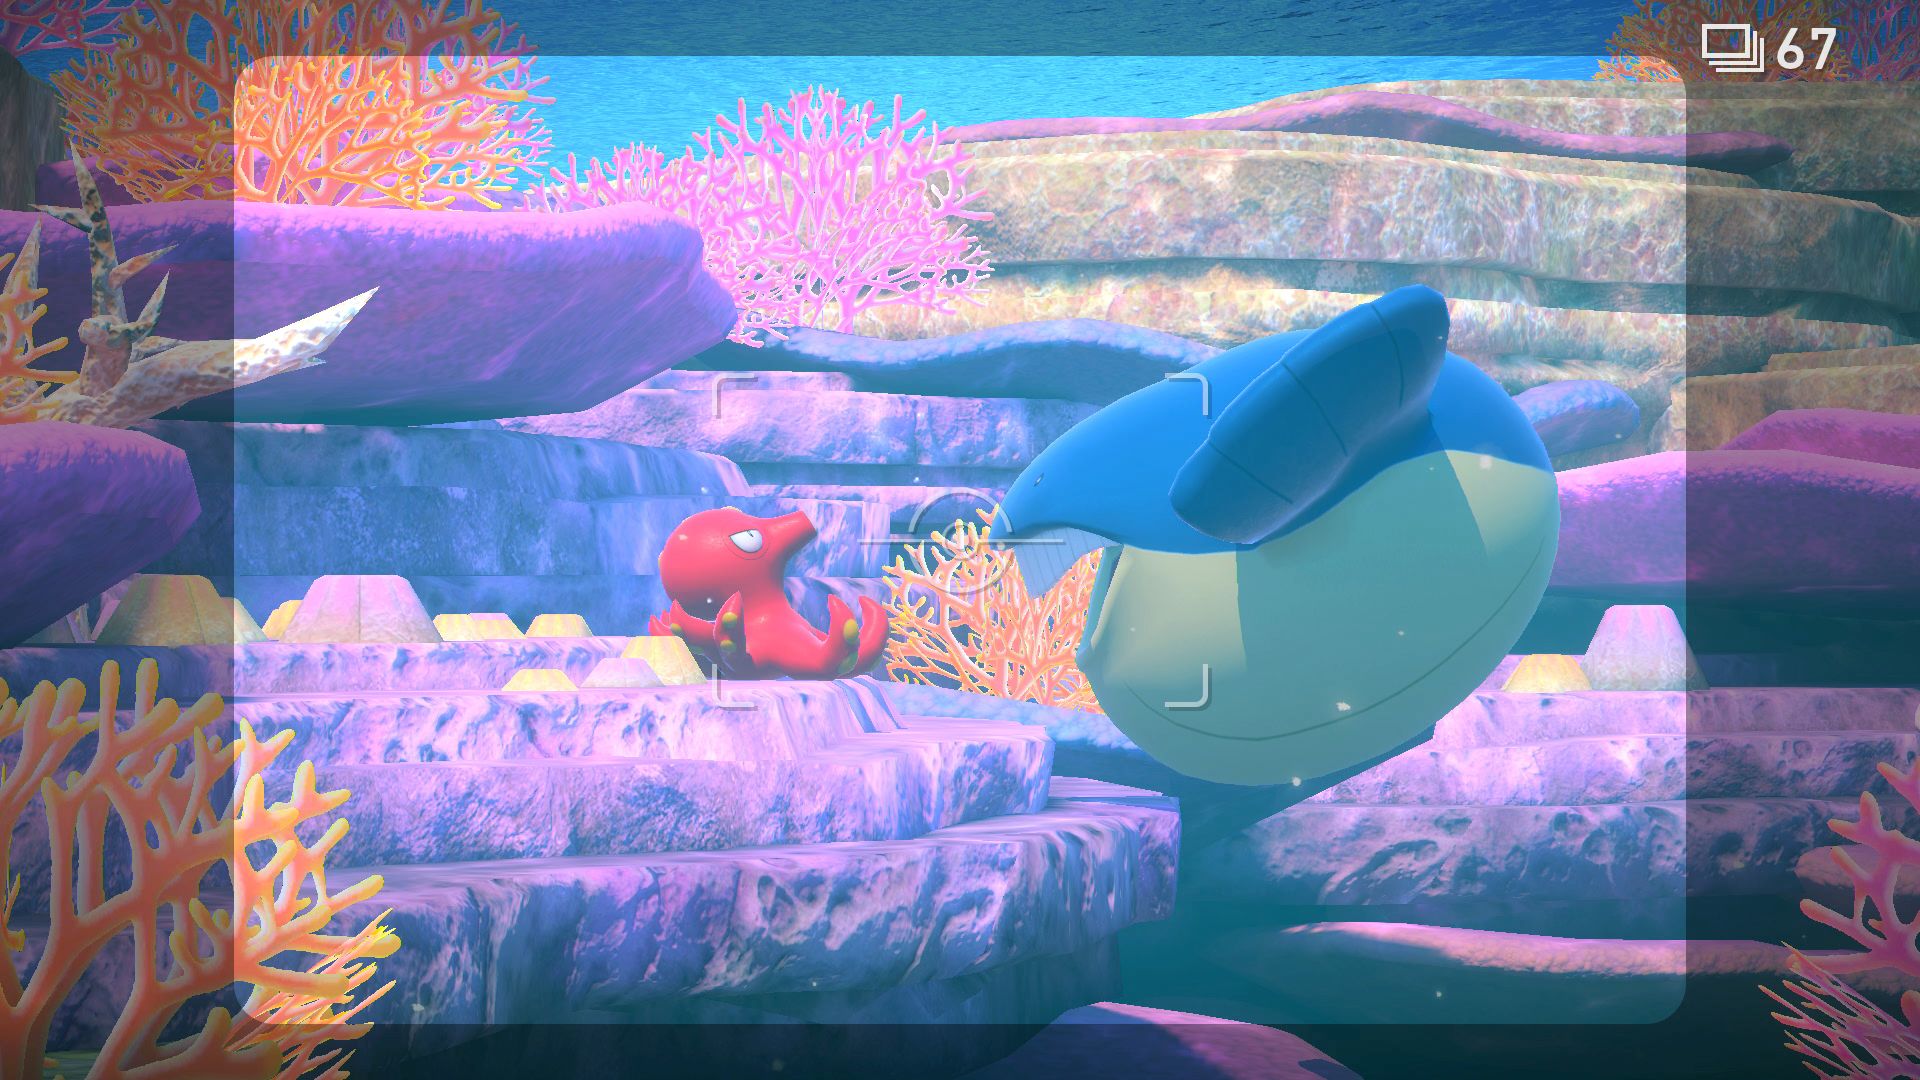 Under the sea. Under the sea. Darling you know the song.  (Screenshot: Nintendo)